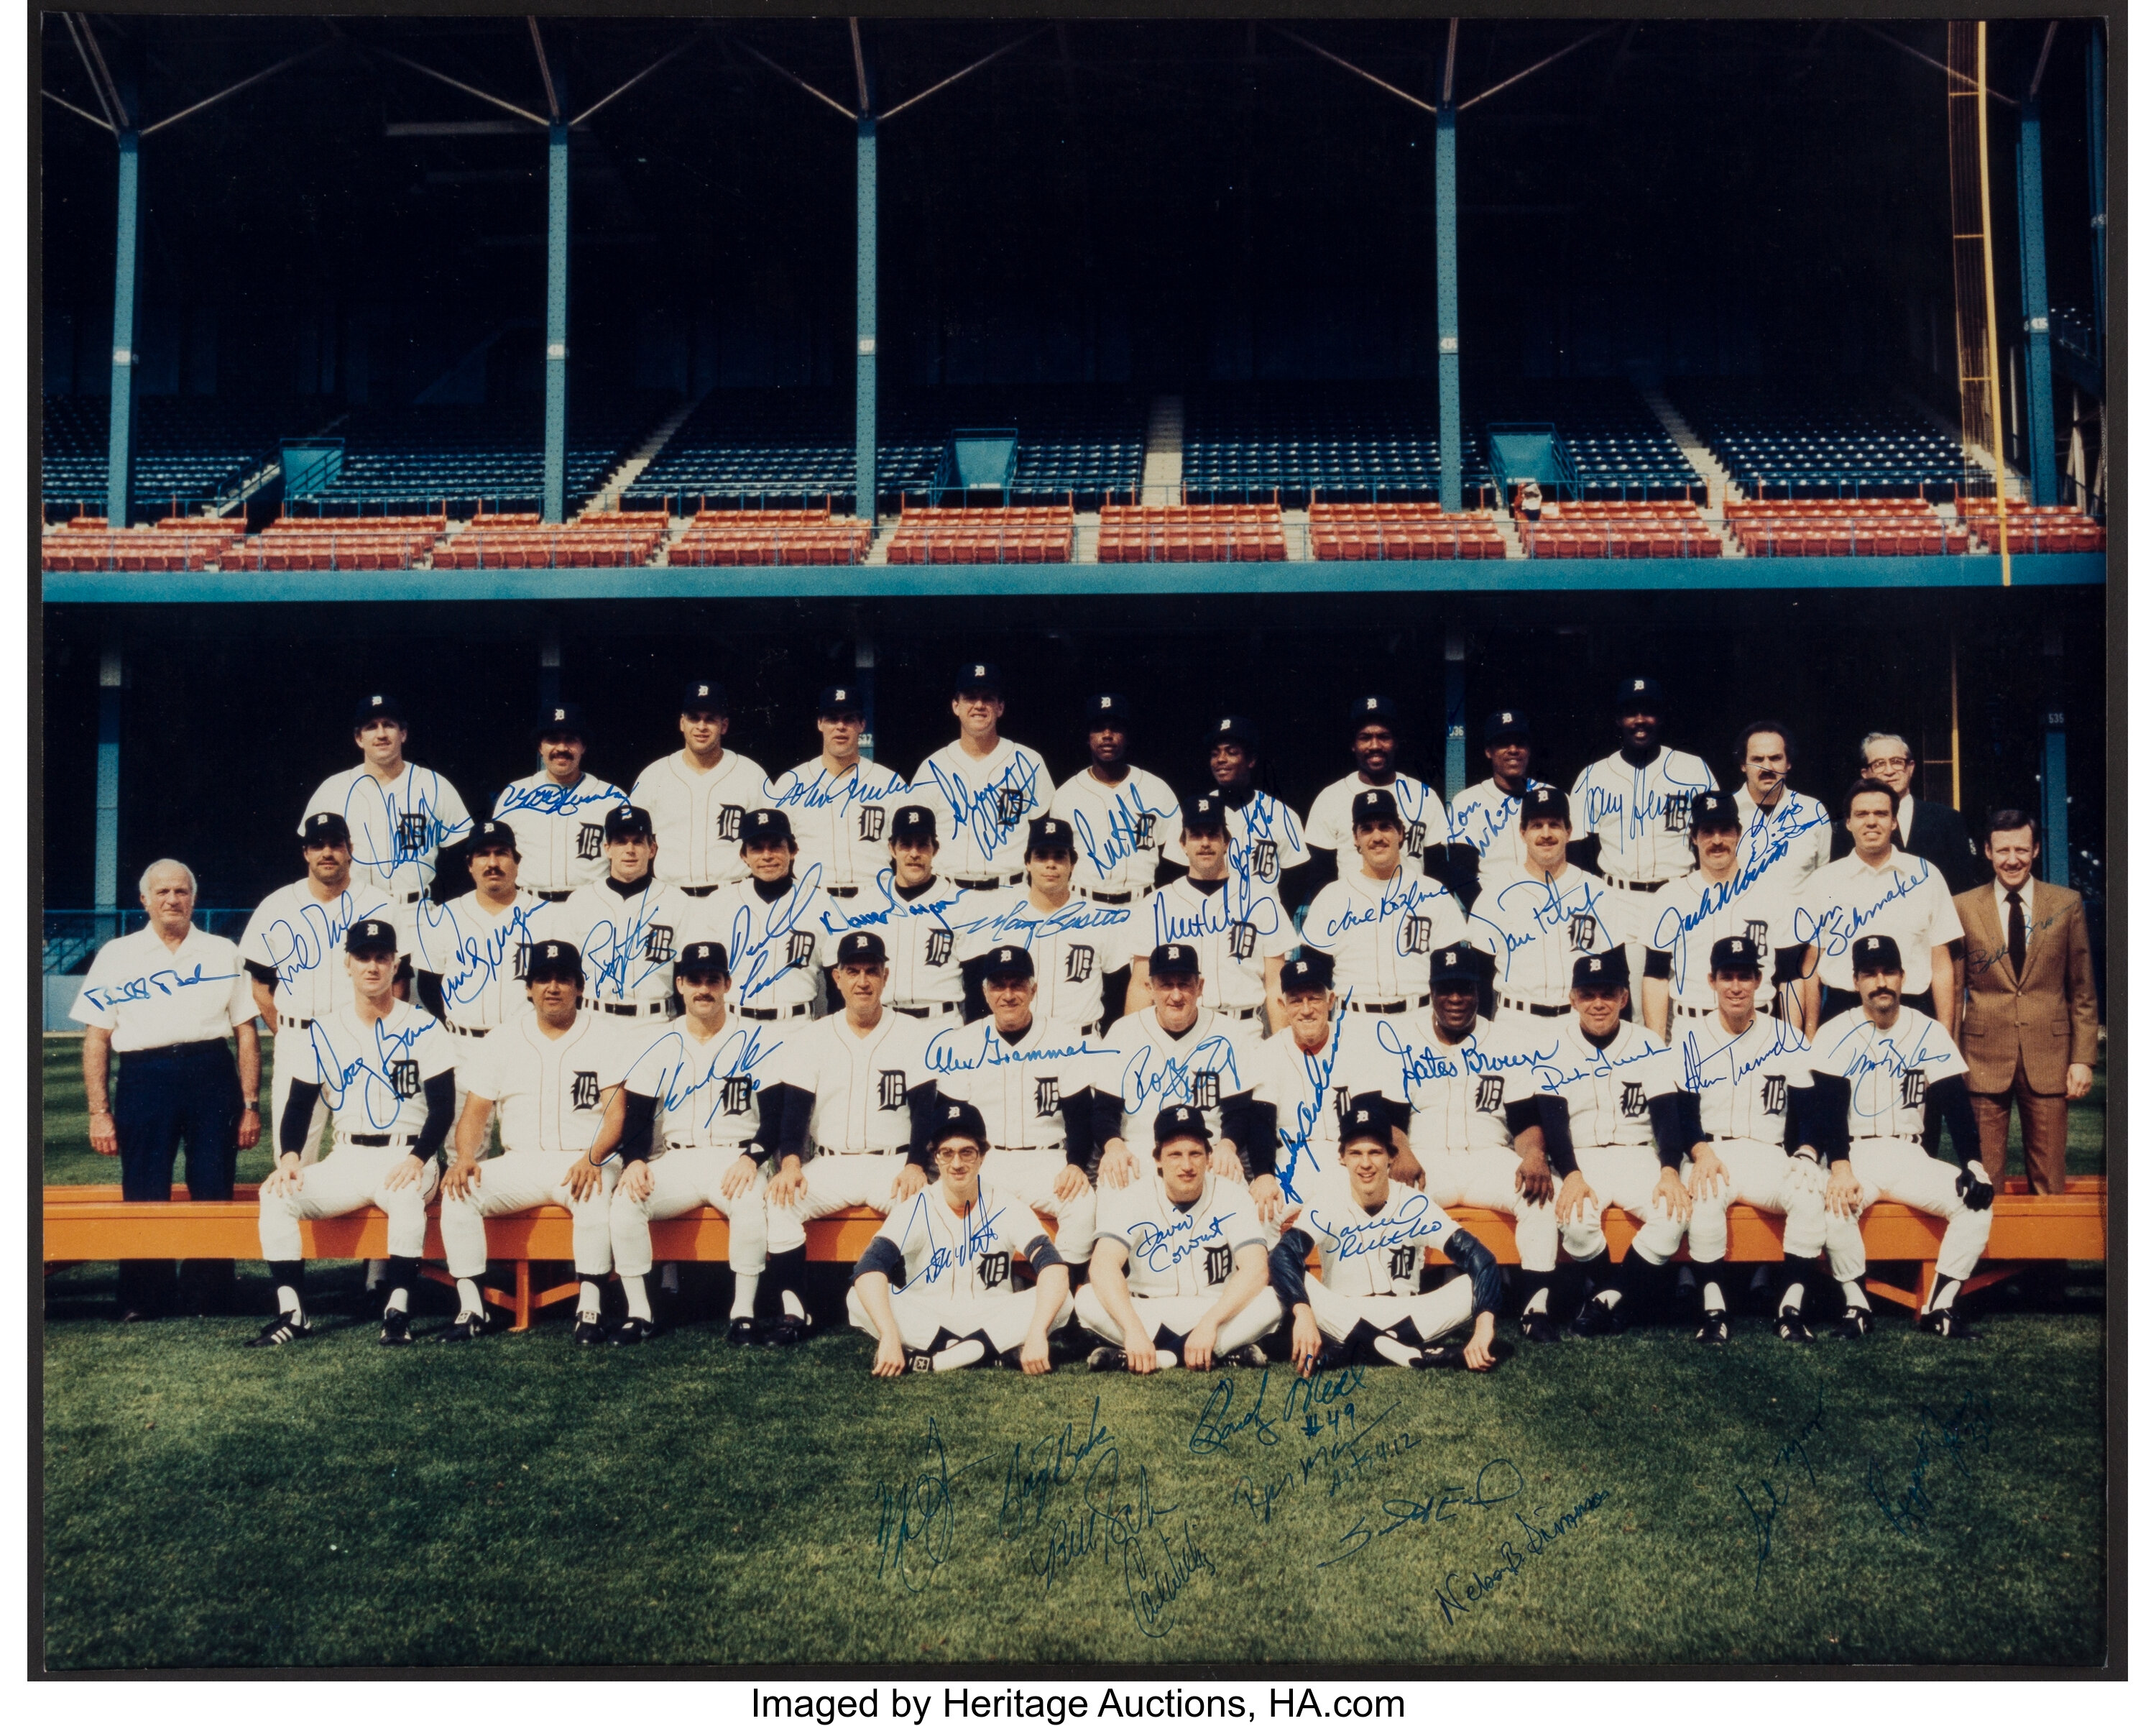 Hall of Fame: 1984 Detroit Tigers finally getting respect they deserve